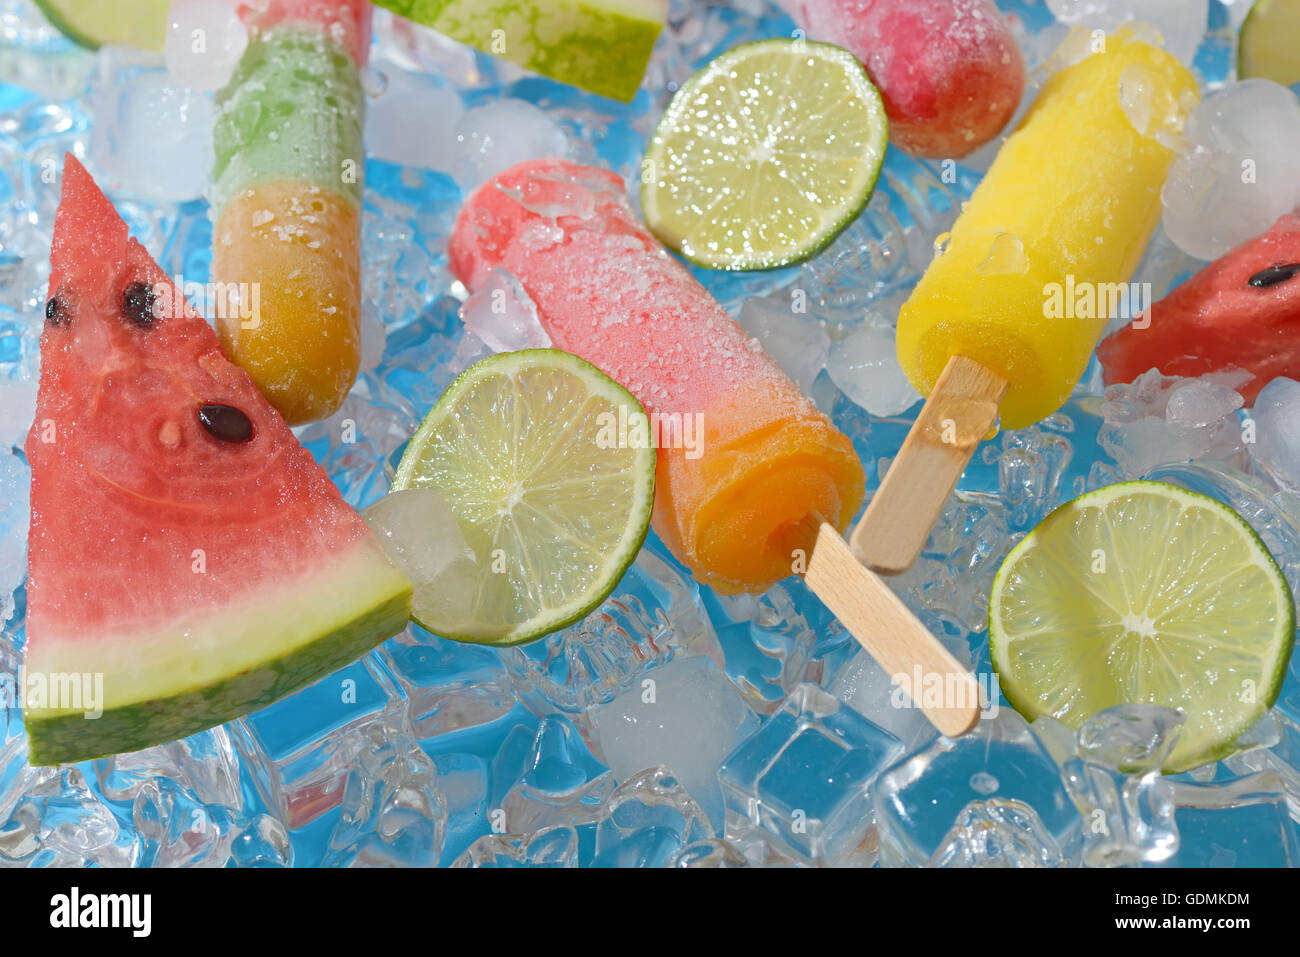 Watermelon, fruit  popsicle and lime slices on ice cubes Stock Photo